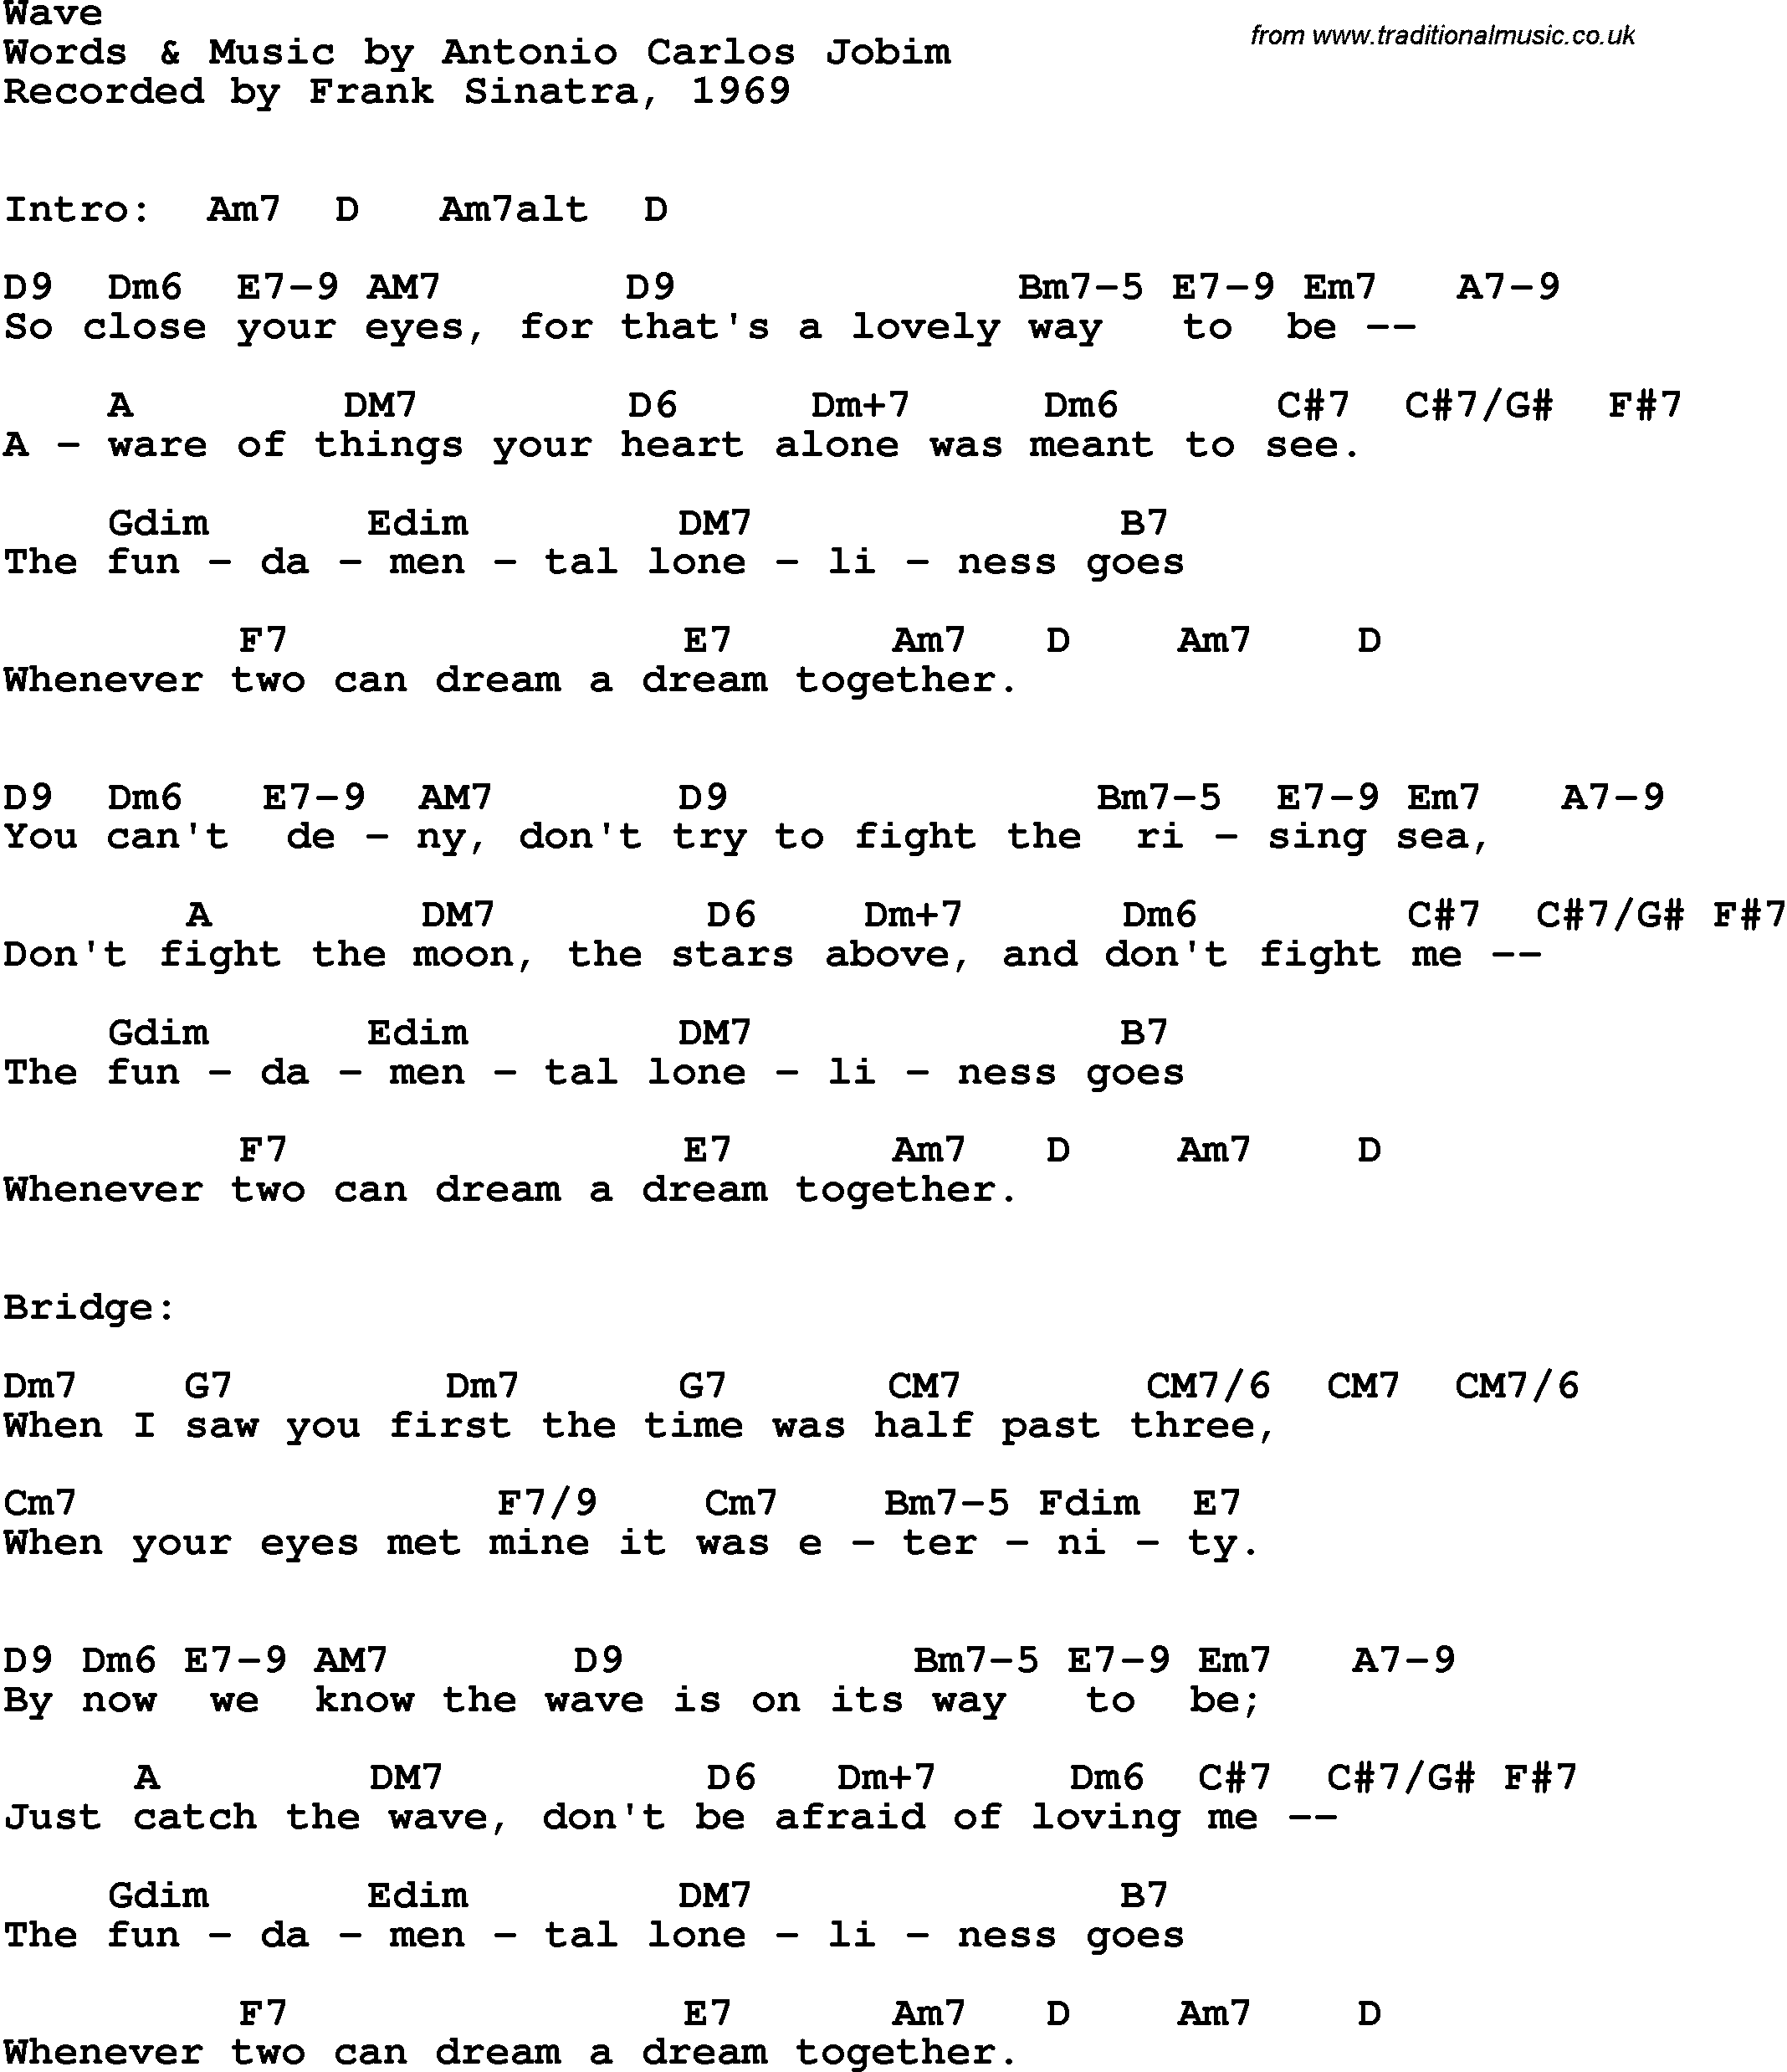 Song Lyrics with guitar chords for Wave - Frank Sinatra, 1969